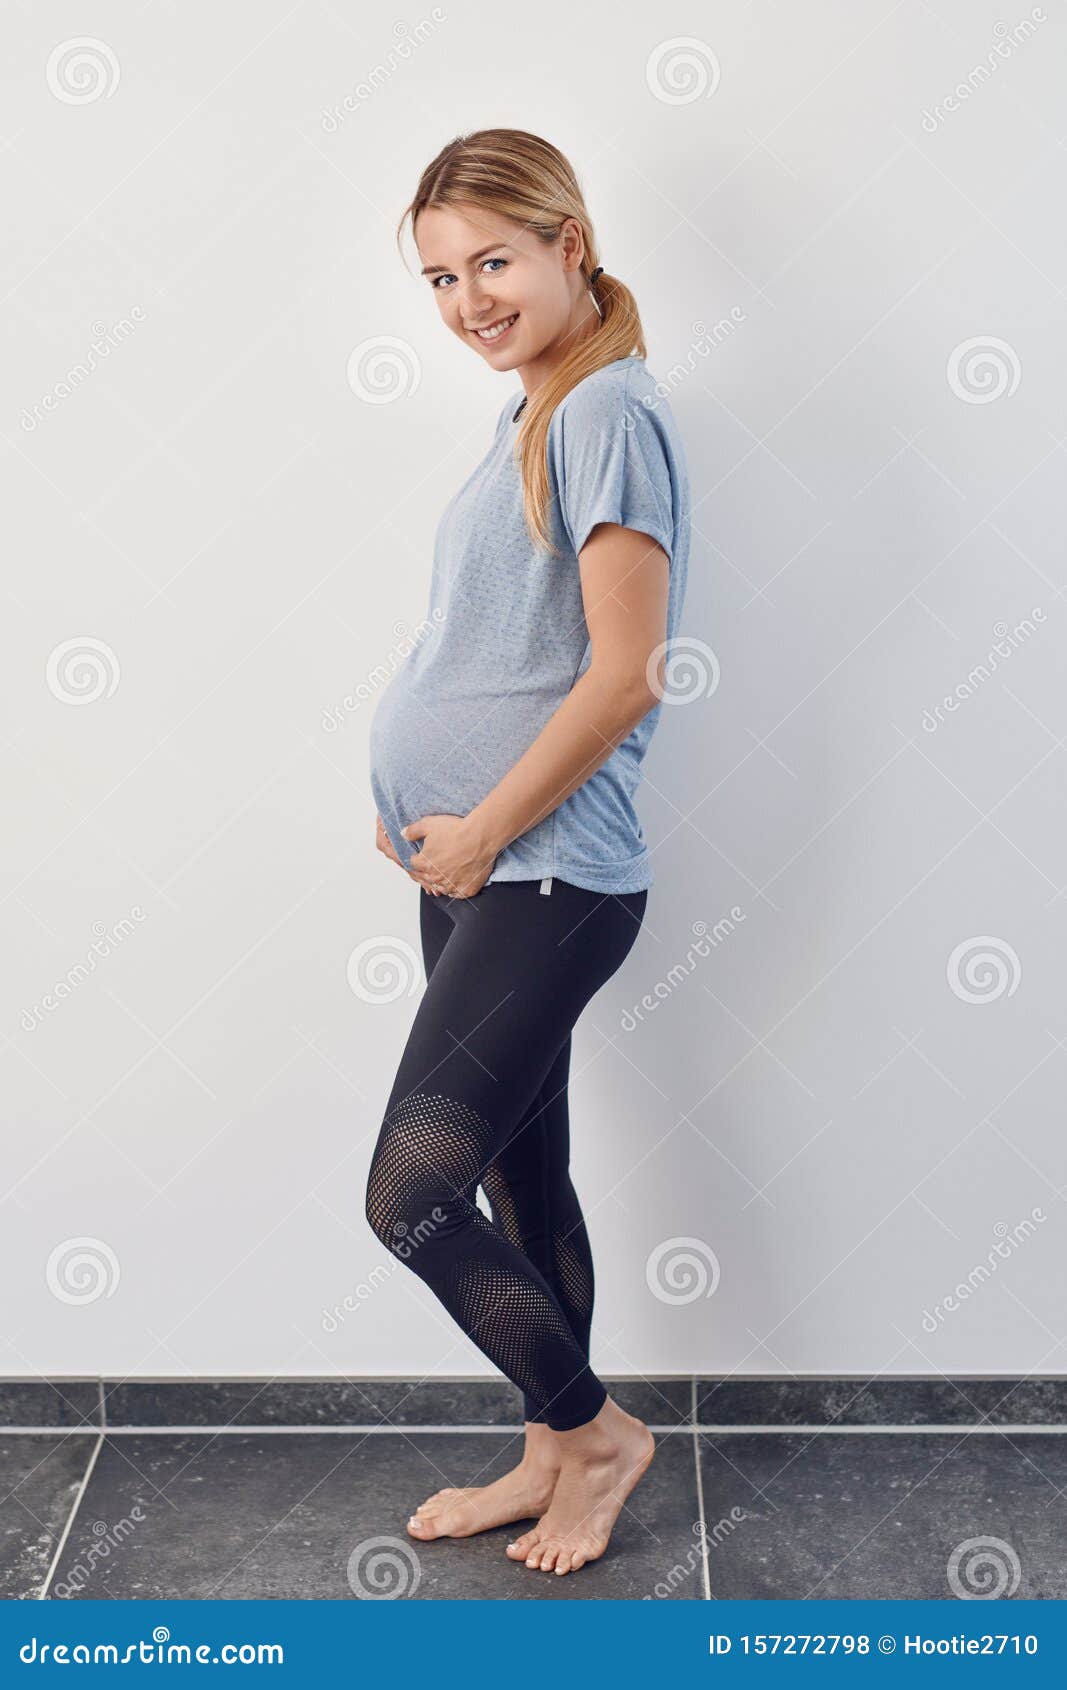 https://thumbs.dreamstime.com/z/side-view-happy-casual-barefoot-pregnant-young-woman-cradling-her-baby-bump-her-hands-turning-to-look-camera-157272798.jpg